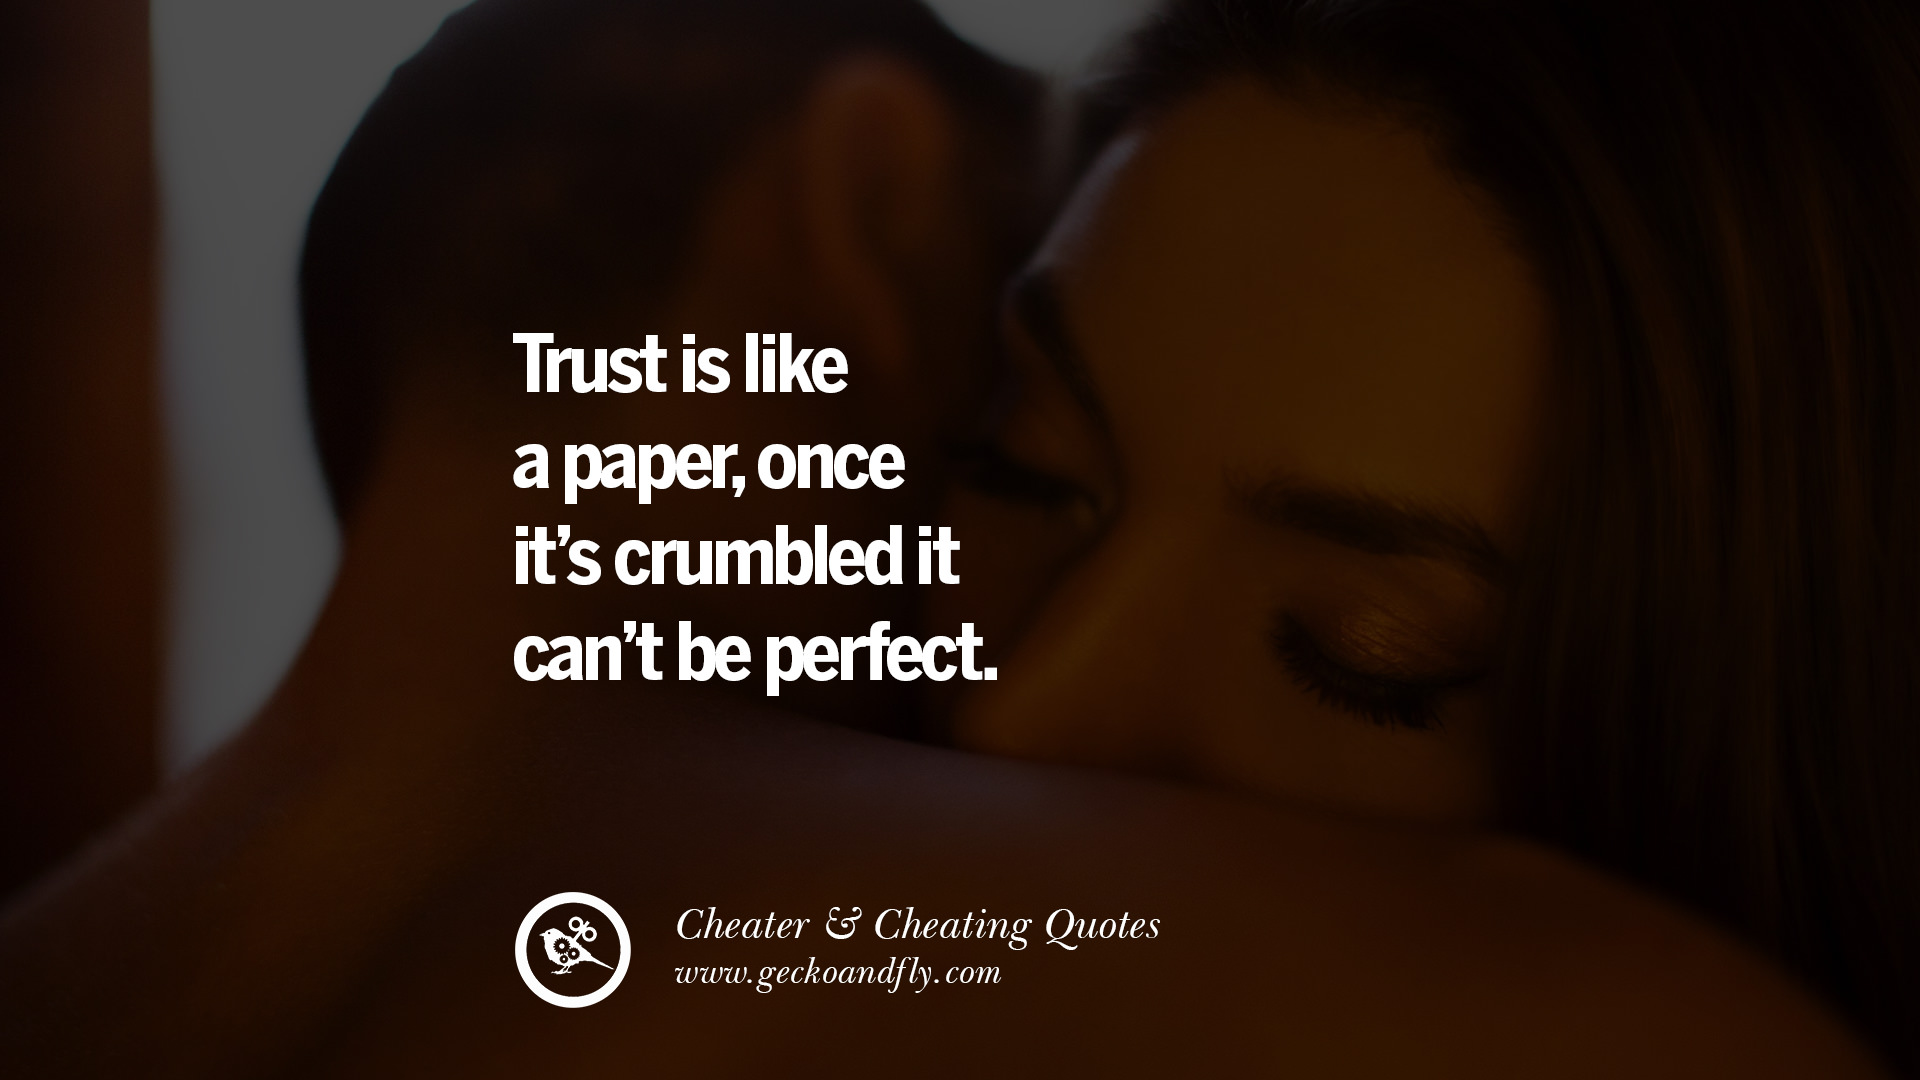 Relationship Quotes Cheating - Someworthwhilequotes.com.